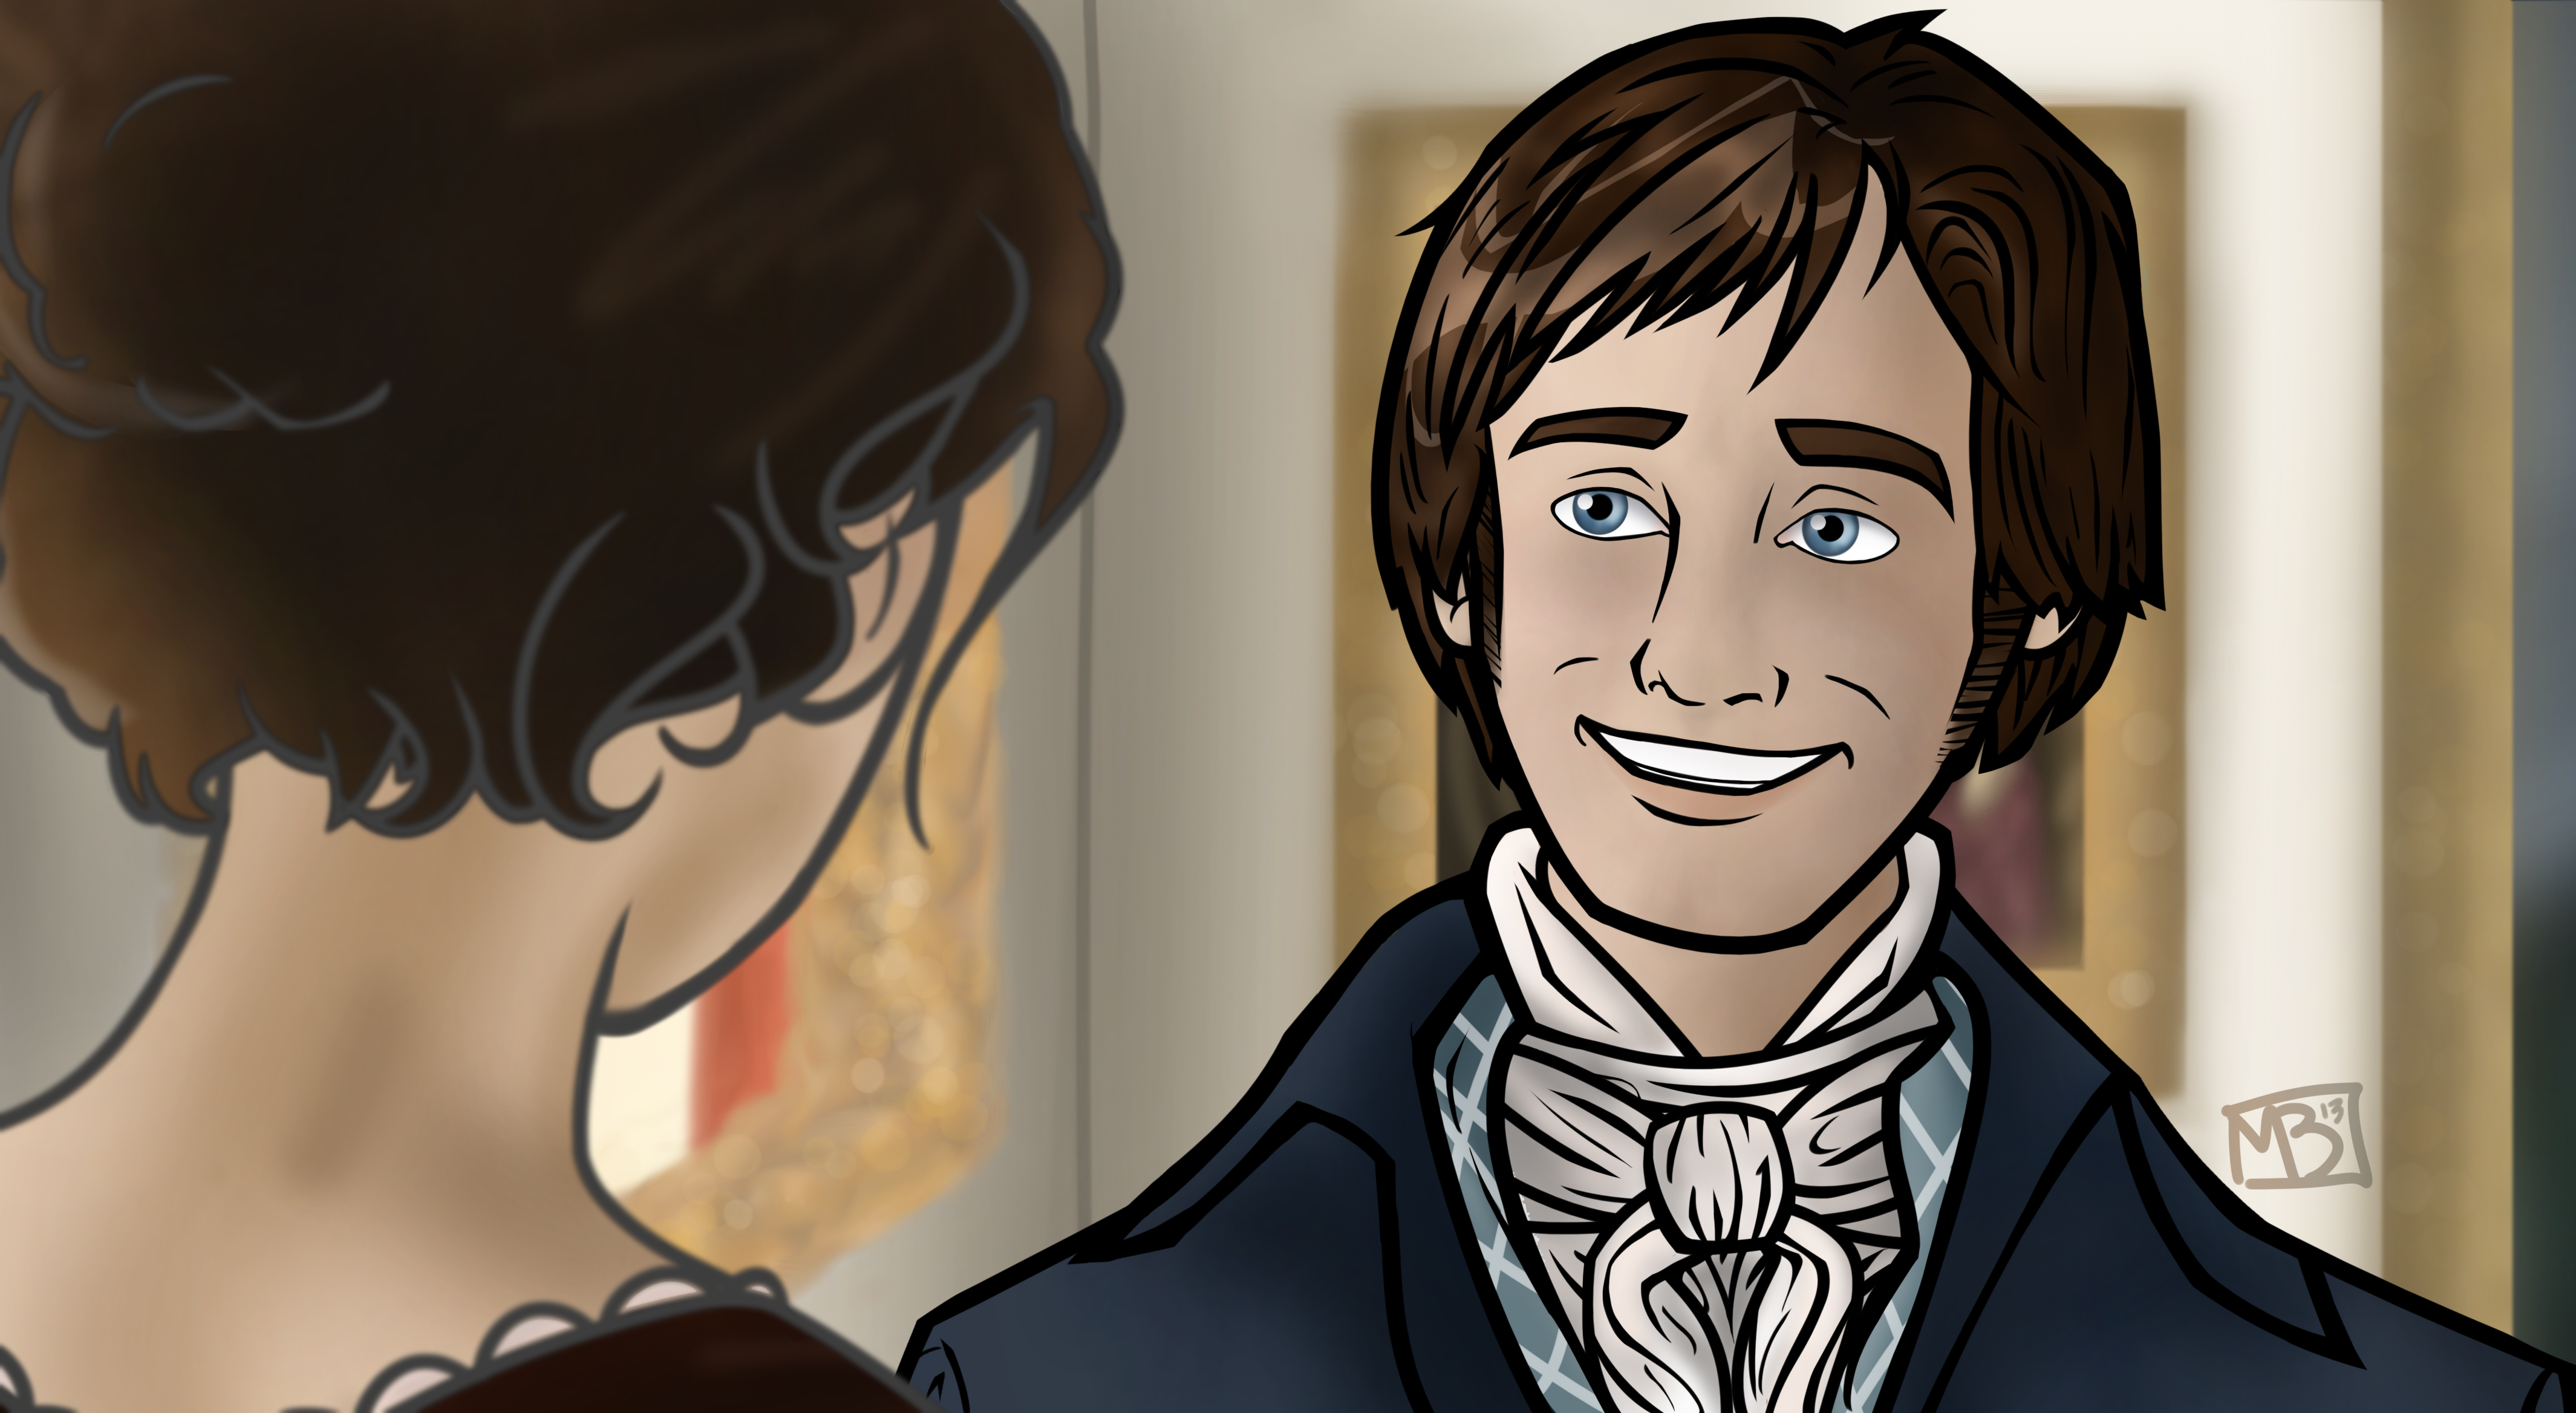 Pride and Prejudice- Character Sketch- Mr. Darcy by Bethany H on Prezi